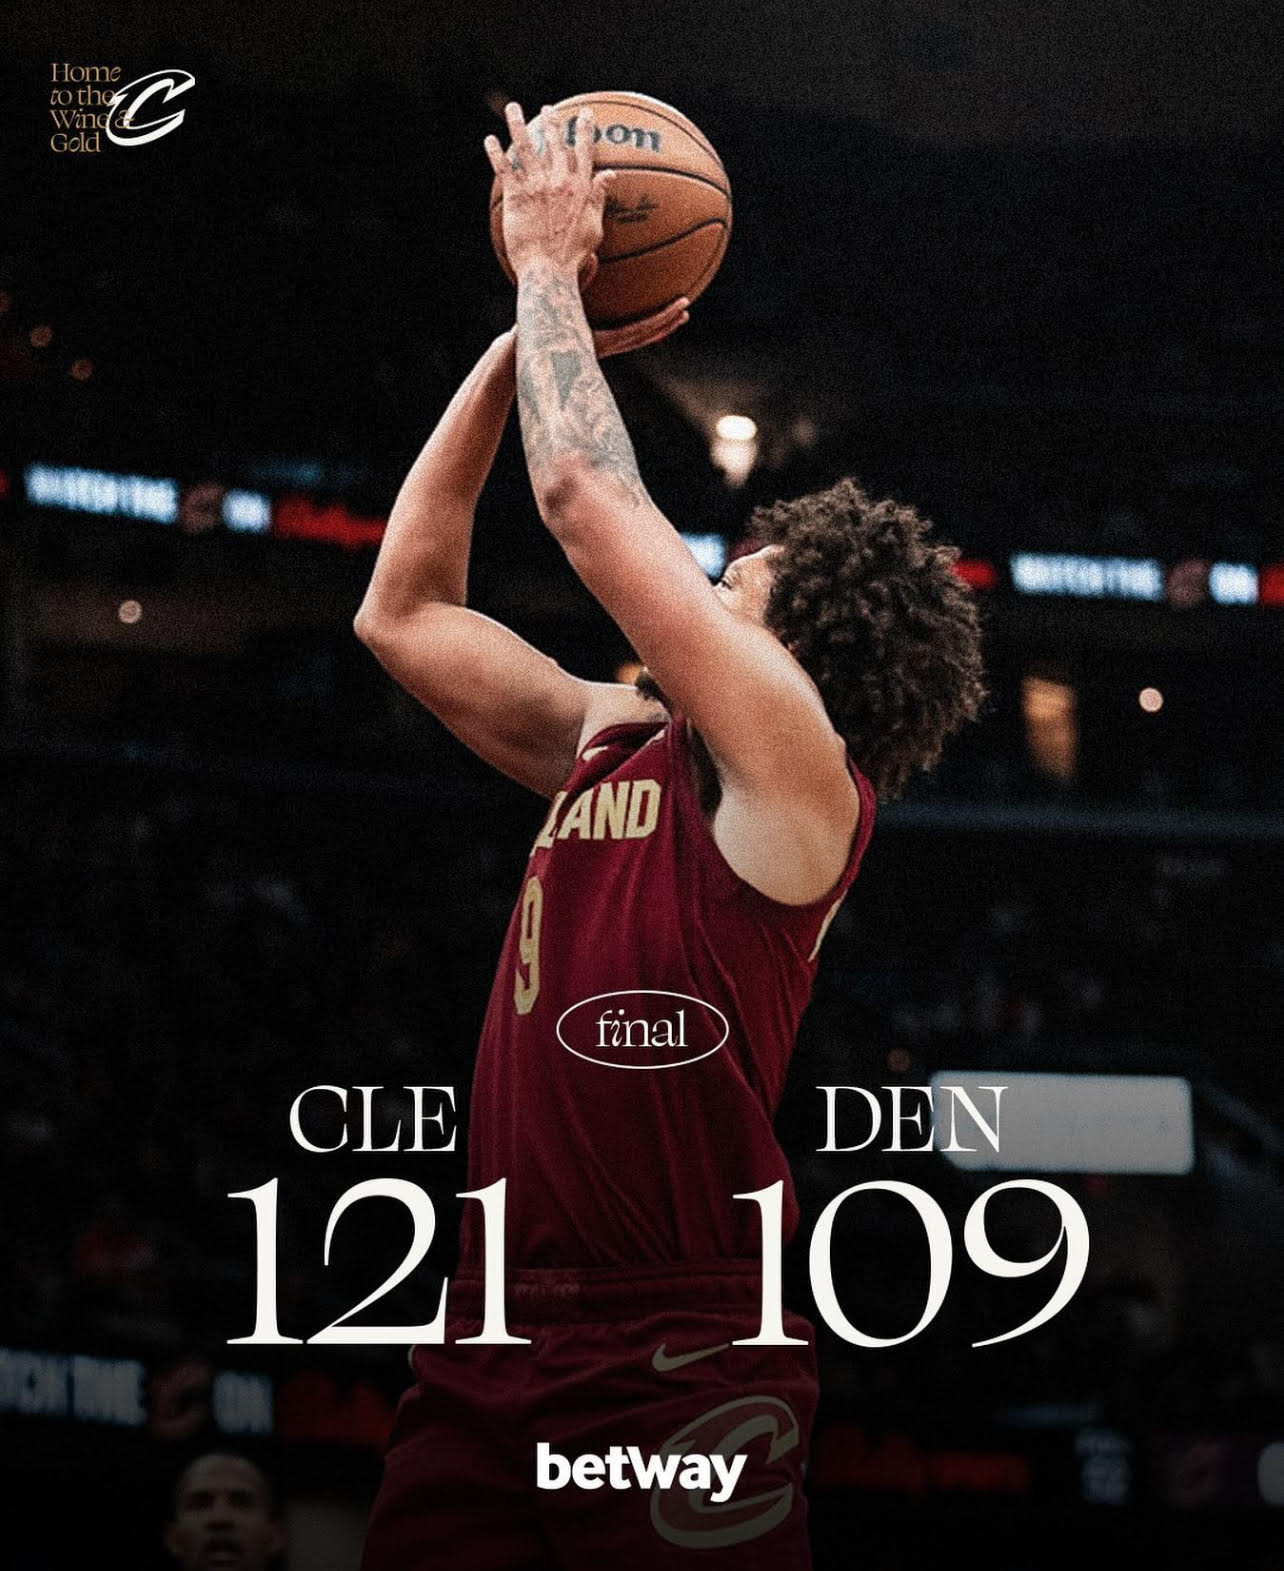 Cavs Beat the Nuggets 121-109